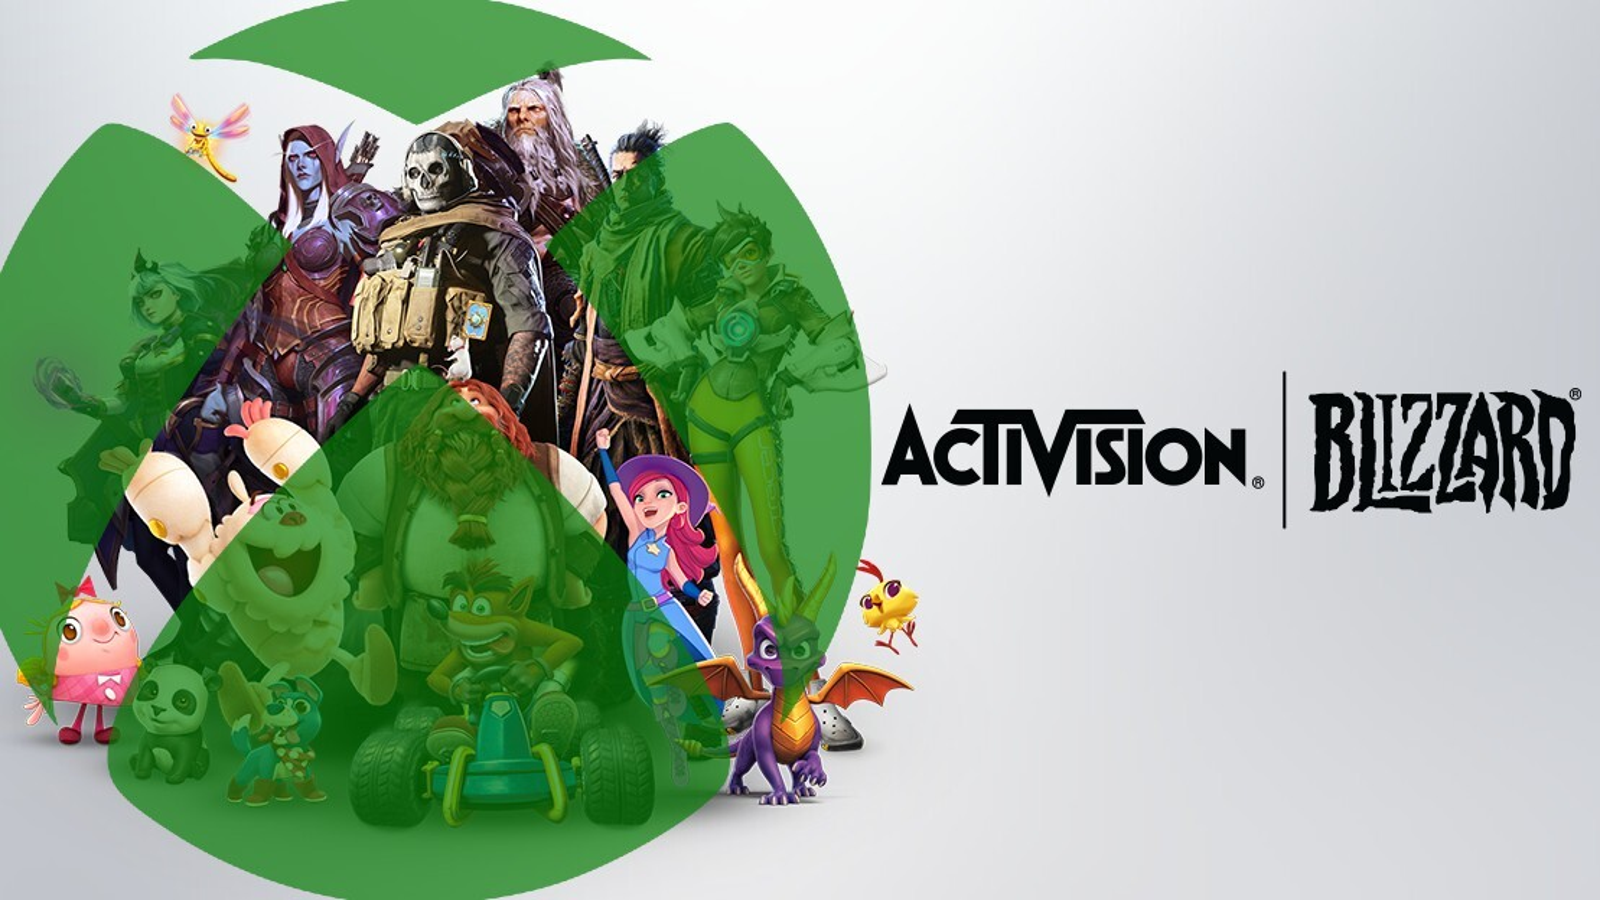 UK clears Microsoft's acquisition of Activision, making sure it